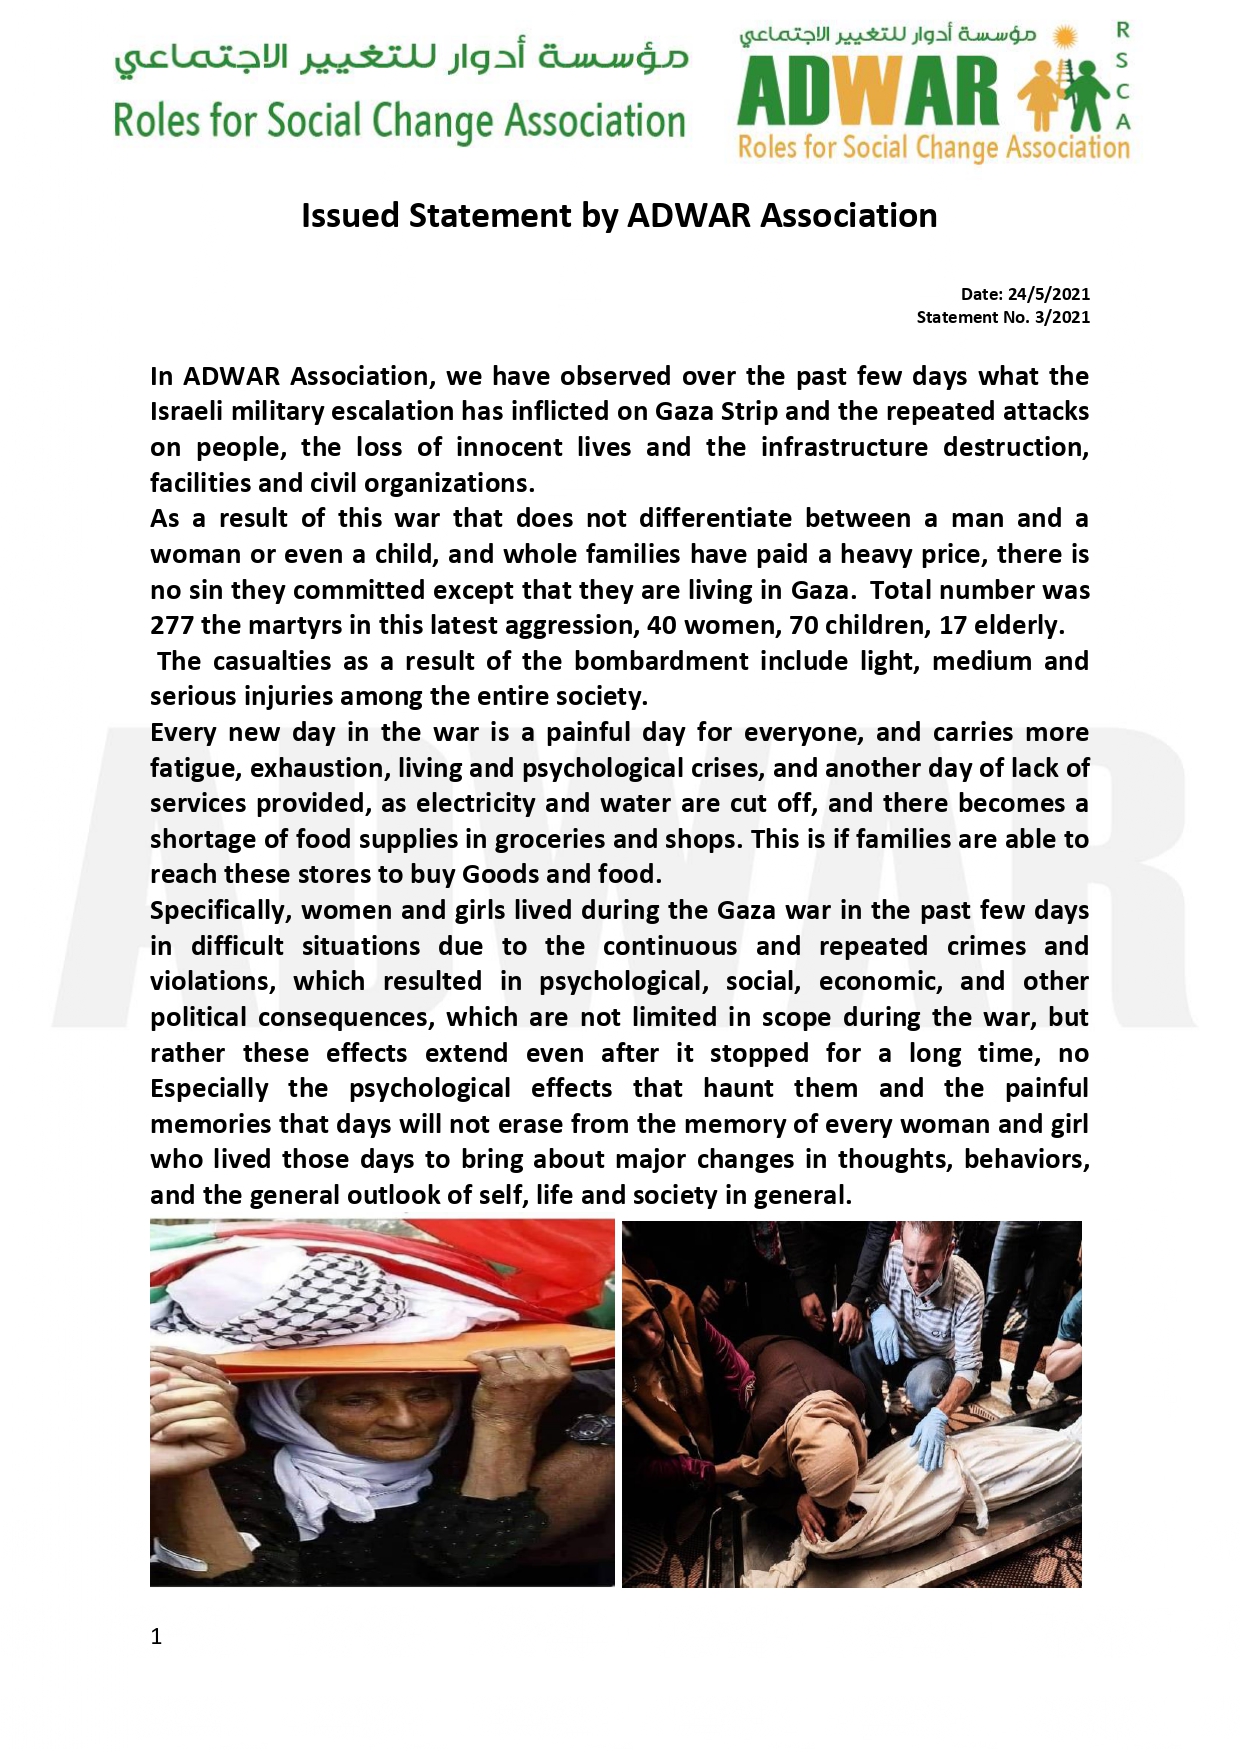  A statement issued by ADWAR Association regarding the military escalation against Gaza and its effects